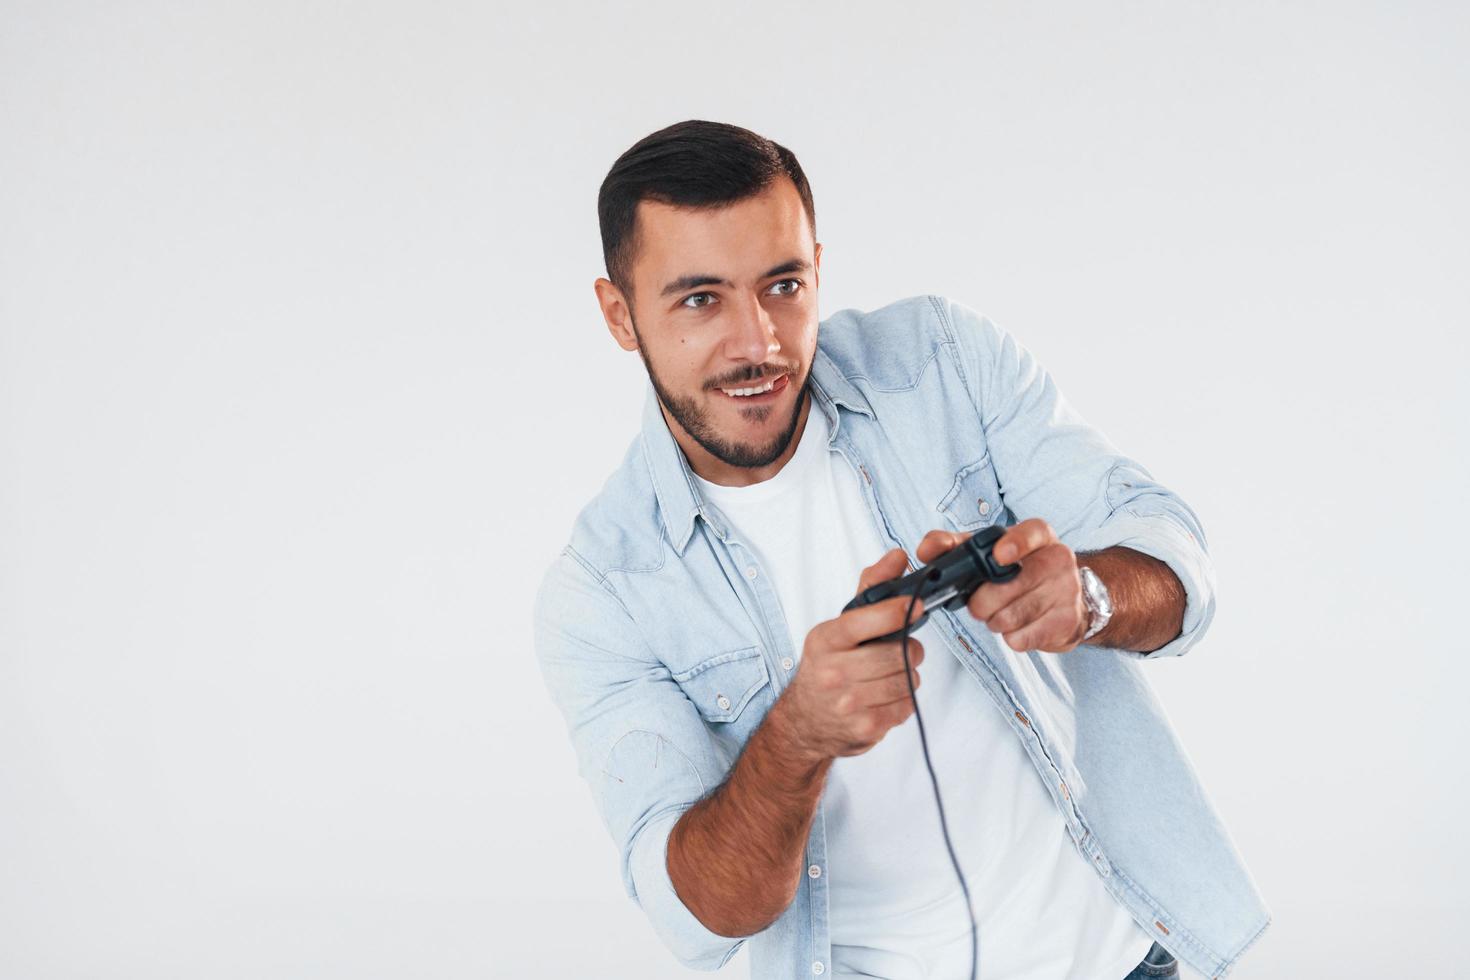 Holds joystick in hands. Young handsome man standing indoors against white background photo